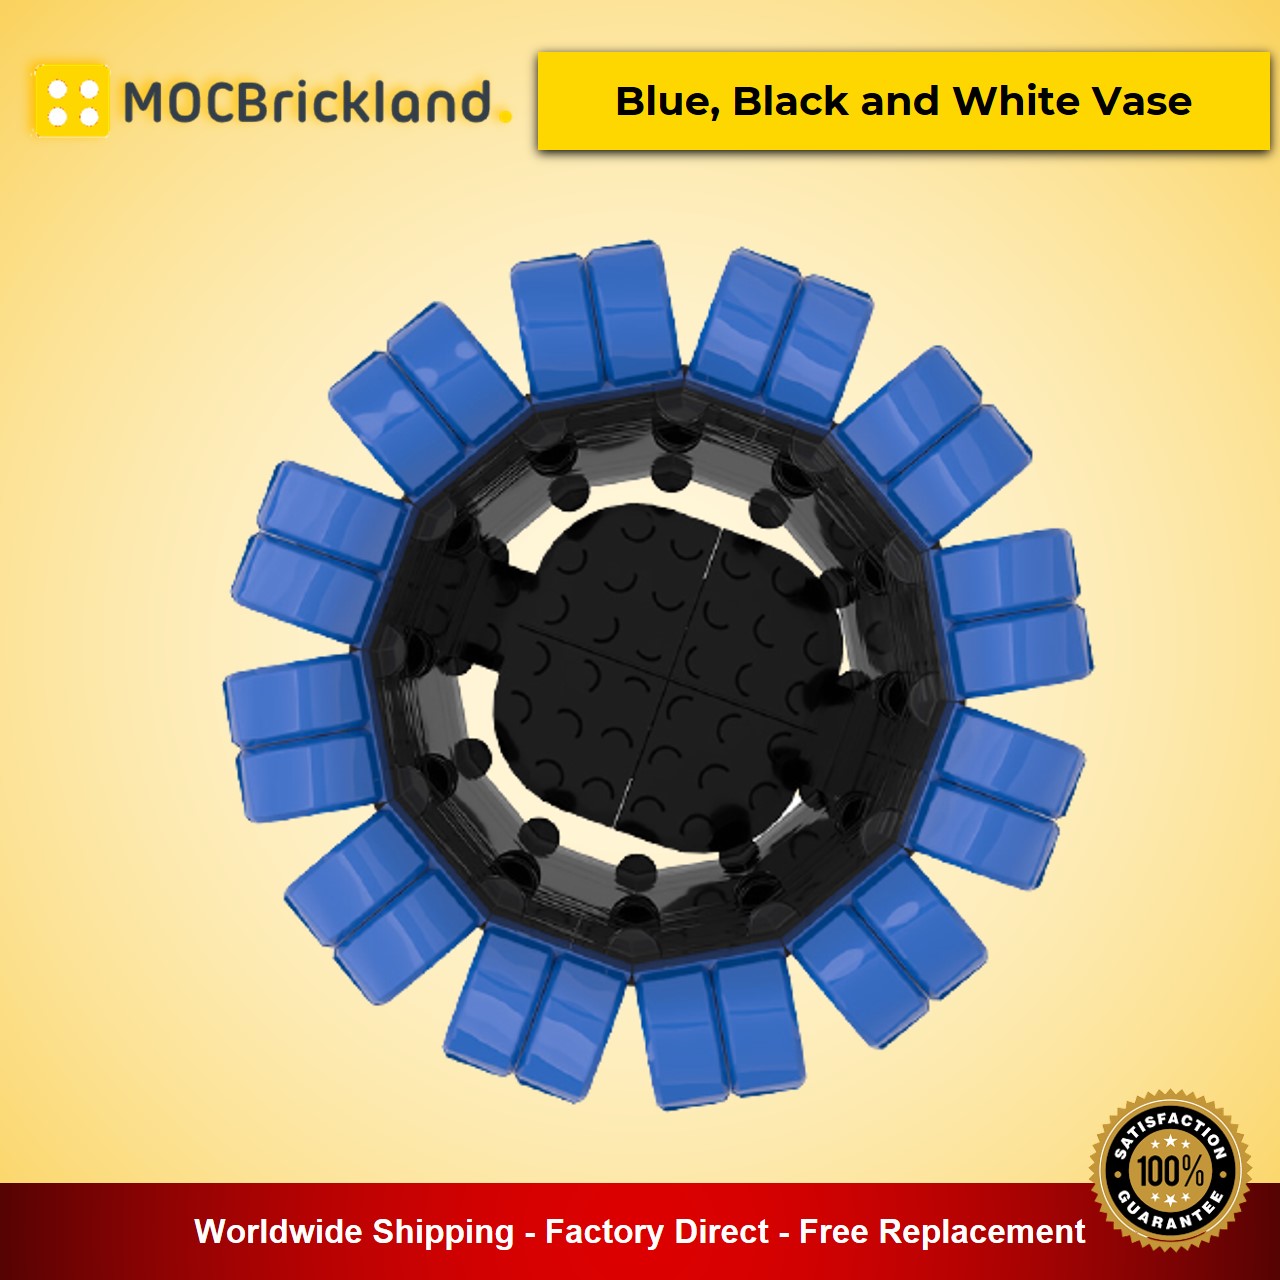 creator moc 90084 90085 90086 blue black and white vase compatible with moc flower bouquet 10280 40461 and 40460 mocbrickland 3054 1